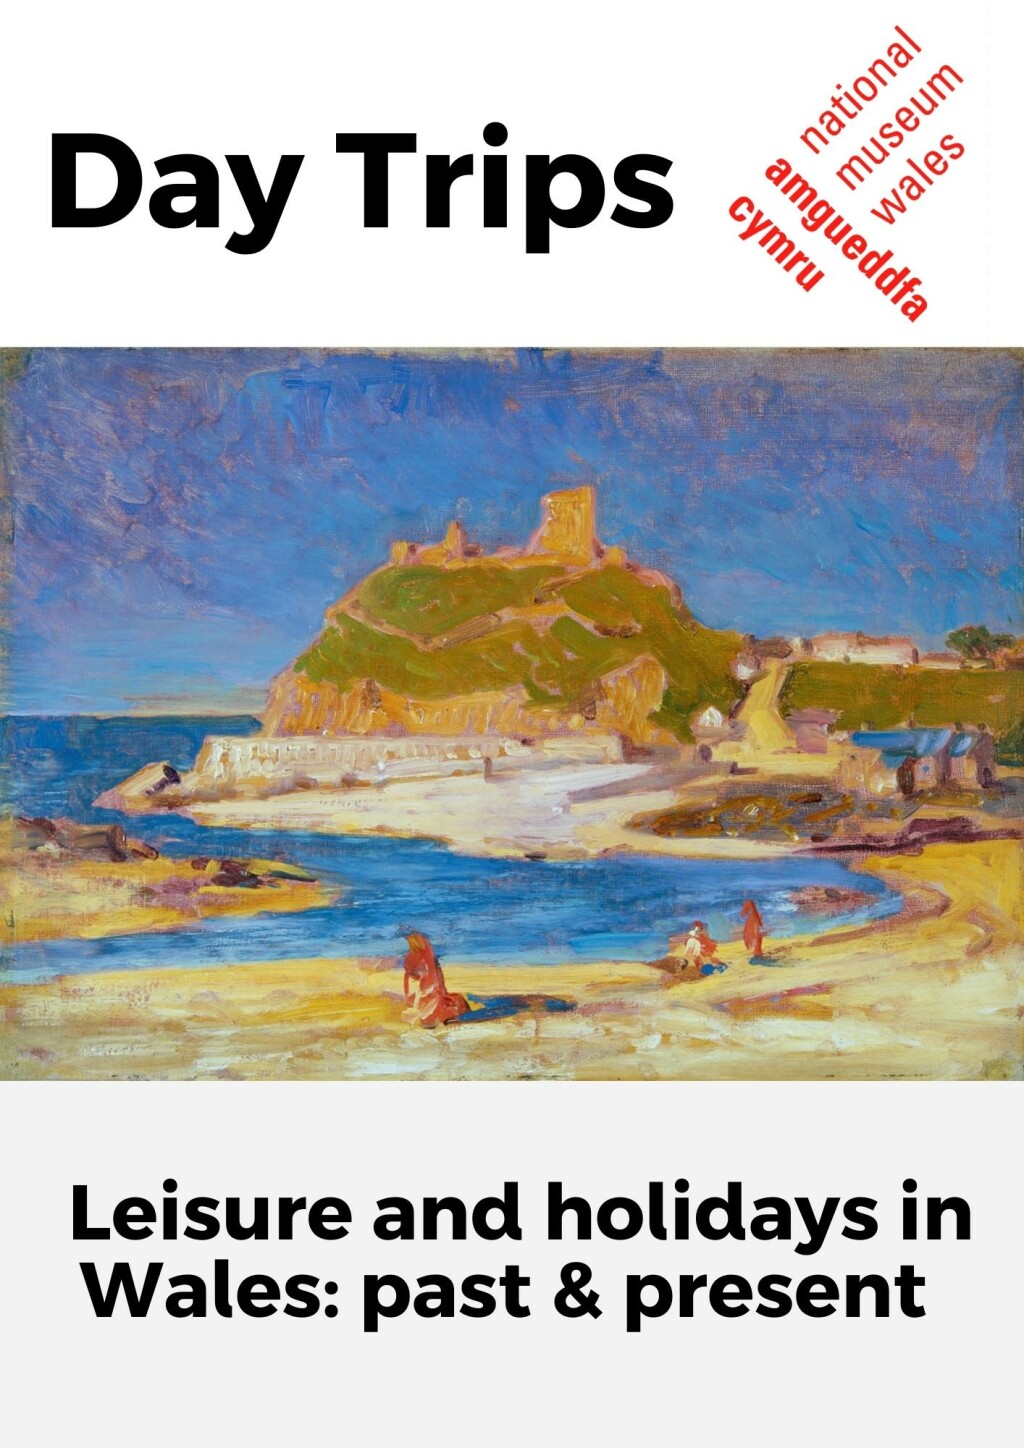 eBook: Day Trips. A study of leisure & holidays in Wales.